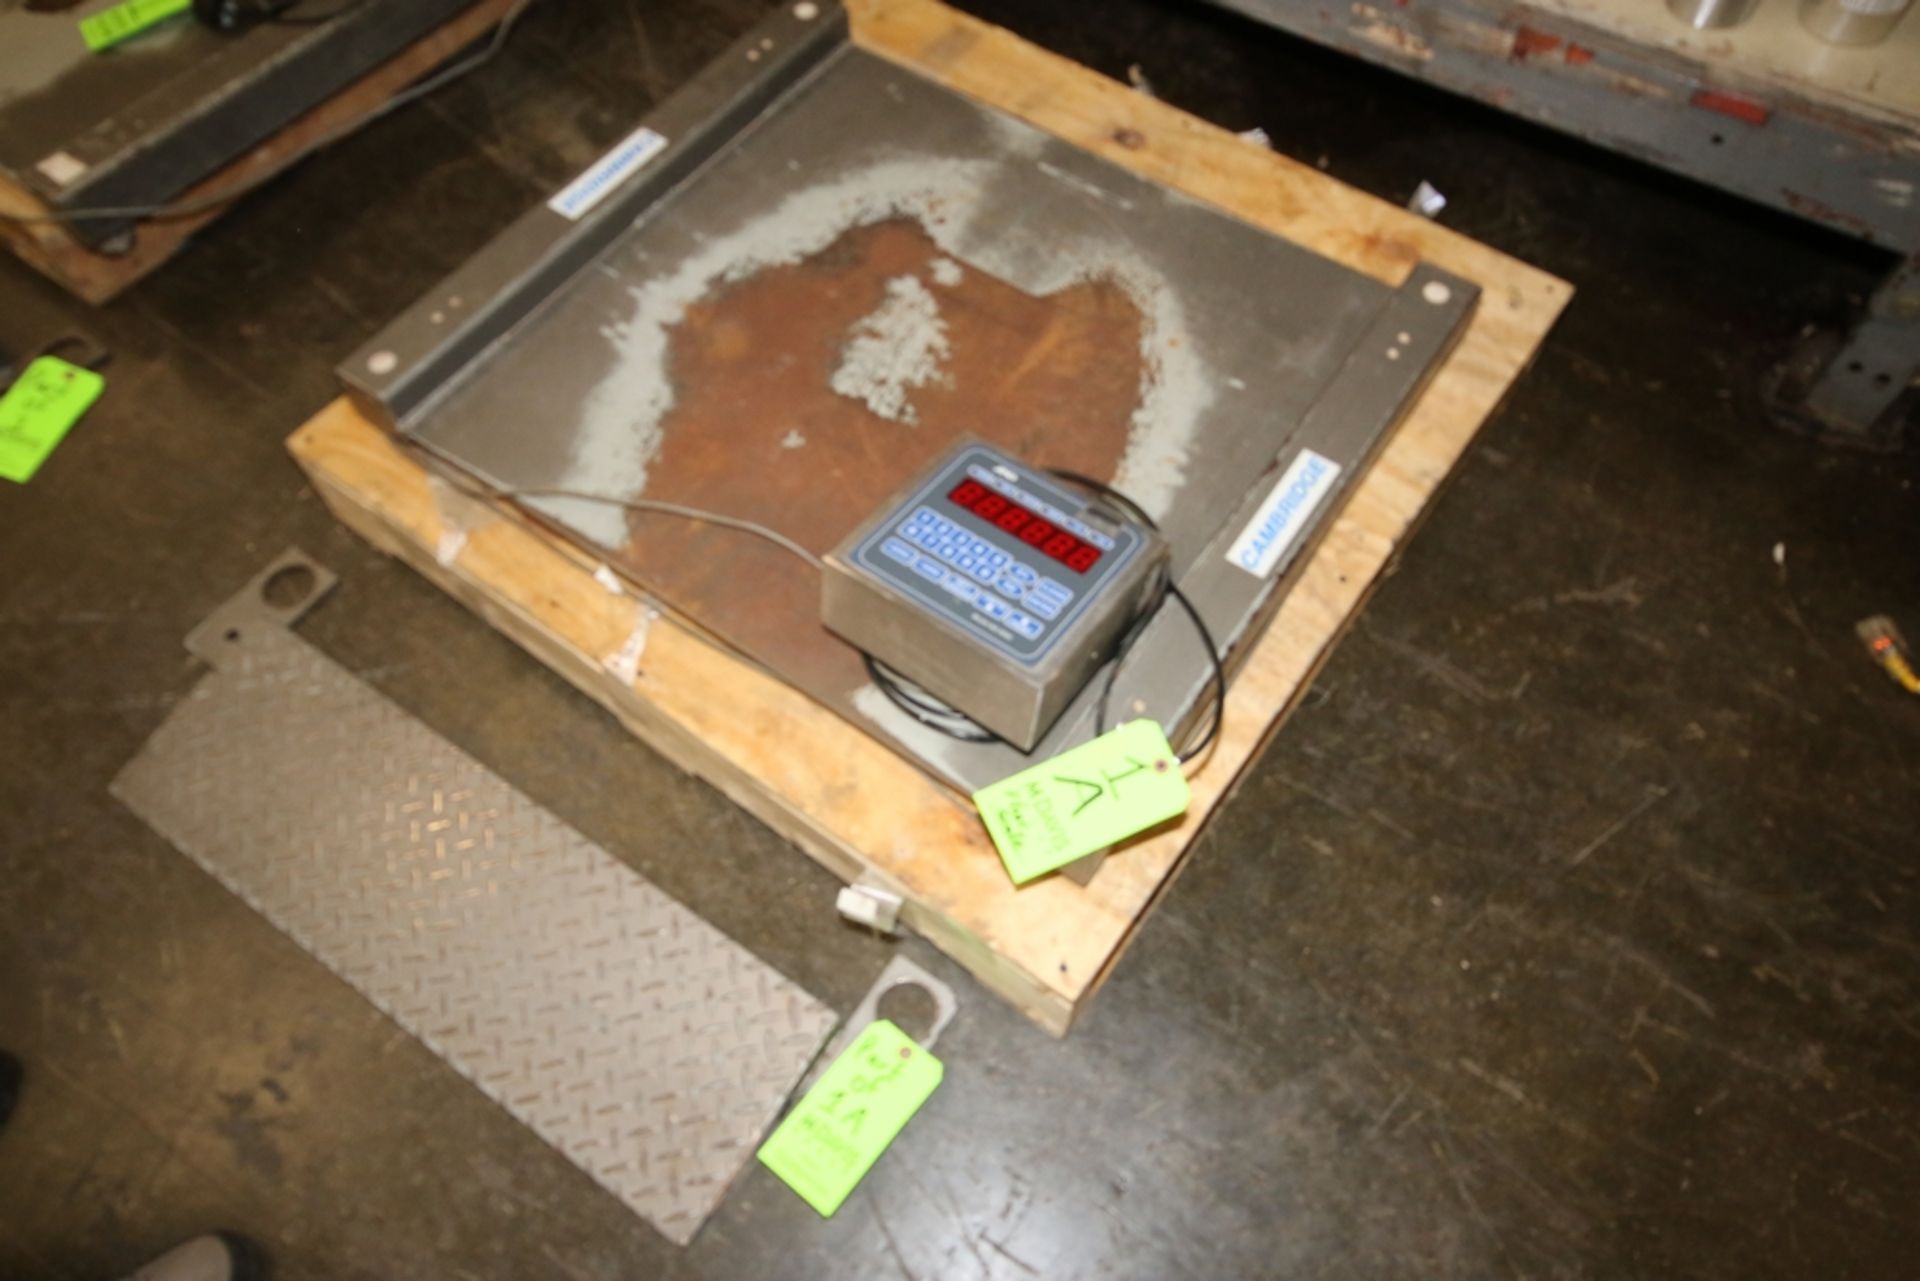 AND S/S Floor Scale with Ramp, M/N AD-5000, with Aprox. 30" L x 30" W Floor Platform, with Digital - Image 3 of 3